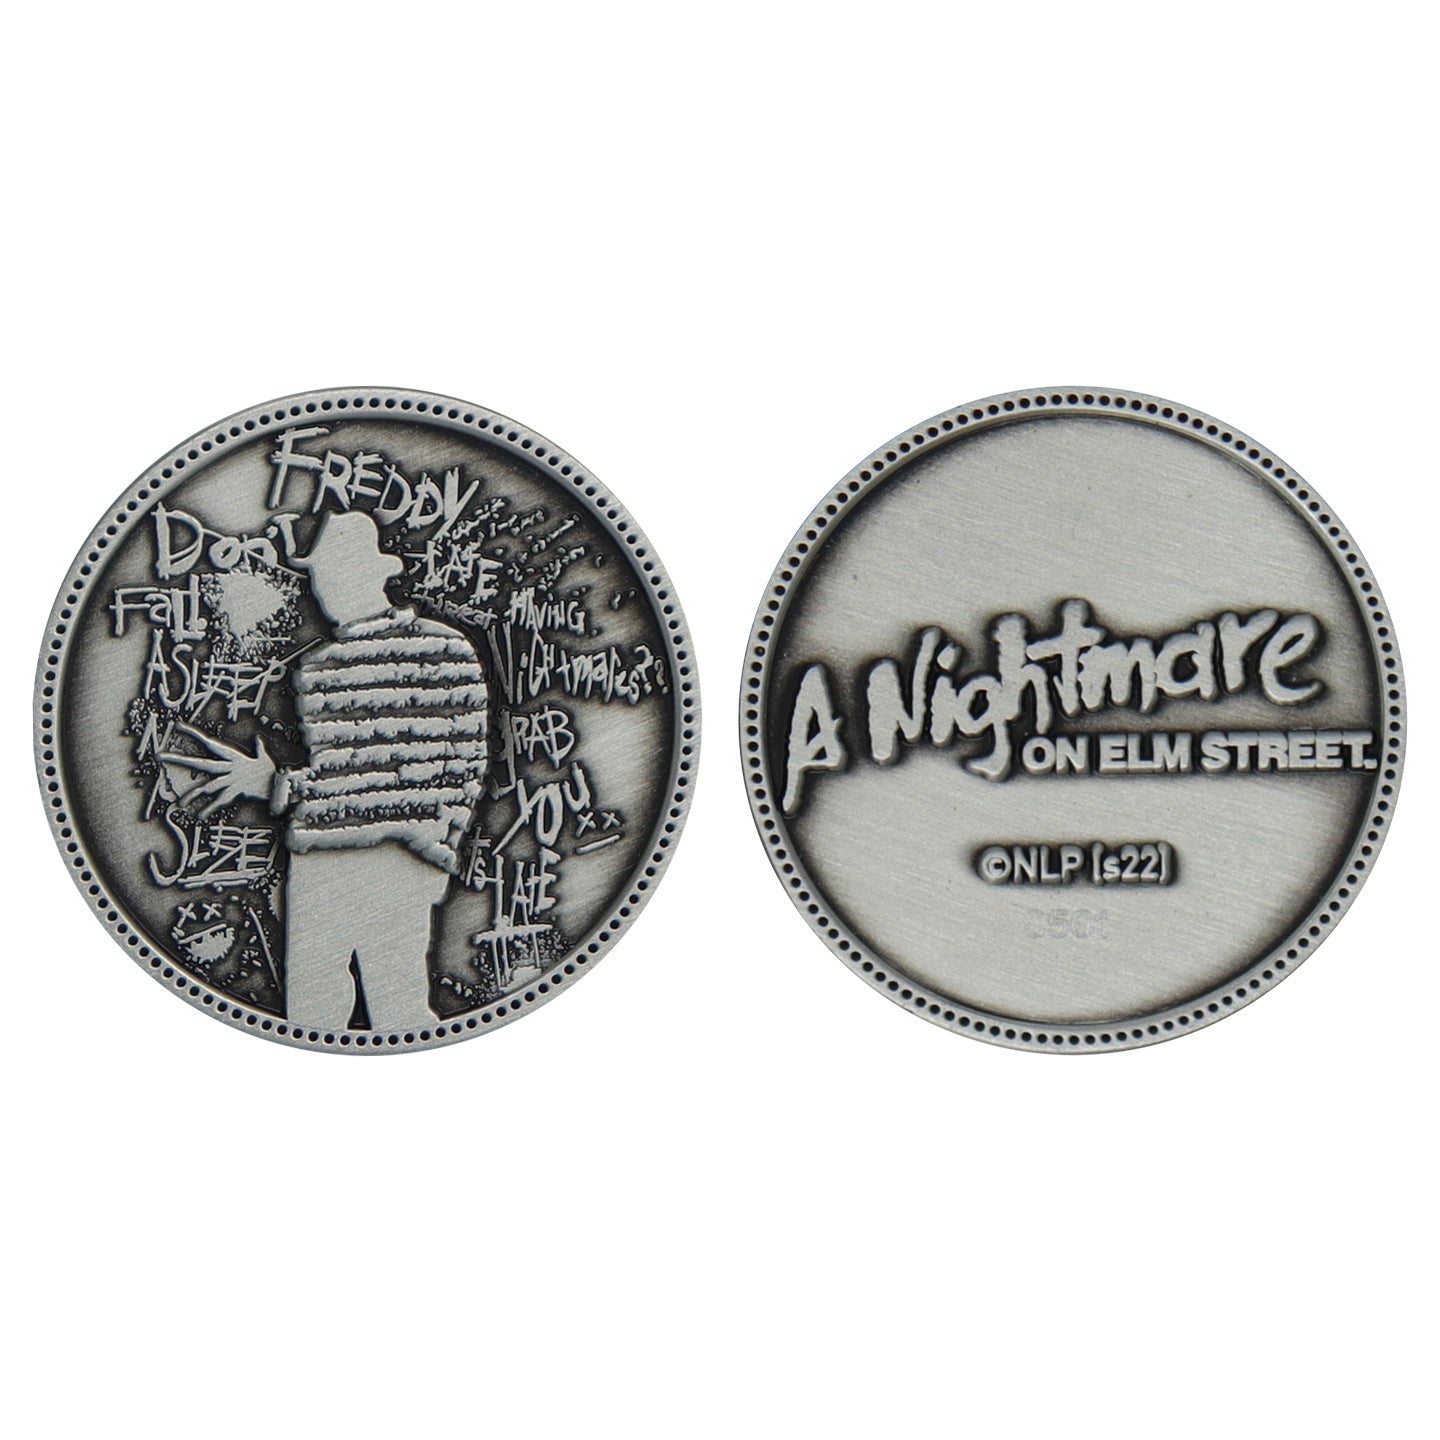 A Nightmare on Elm Street Limited Edition Collectible Coin